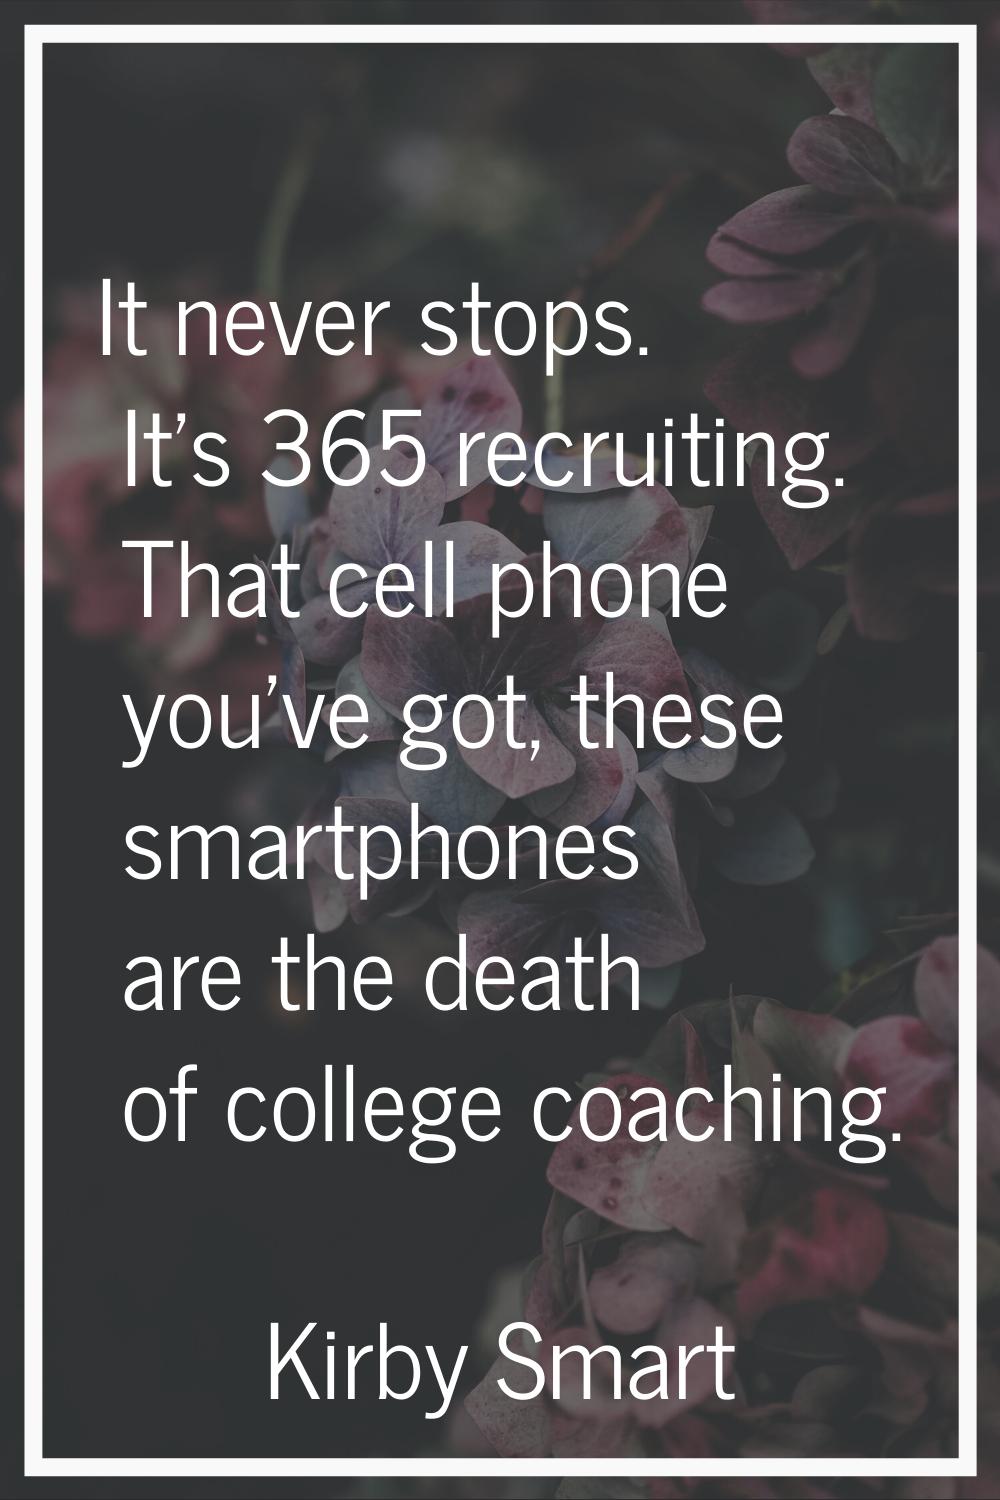 It never stops. It's 365 recruiting. That cell phone you've got, these smartphones are the death of